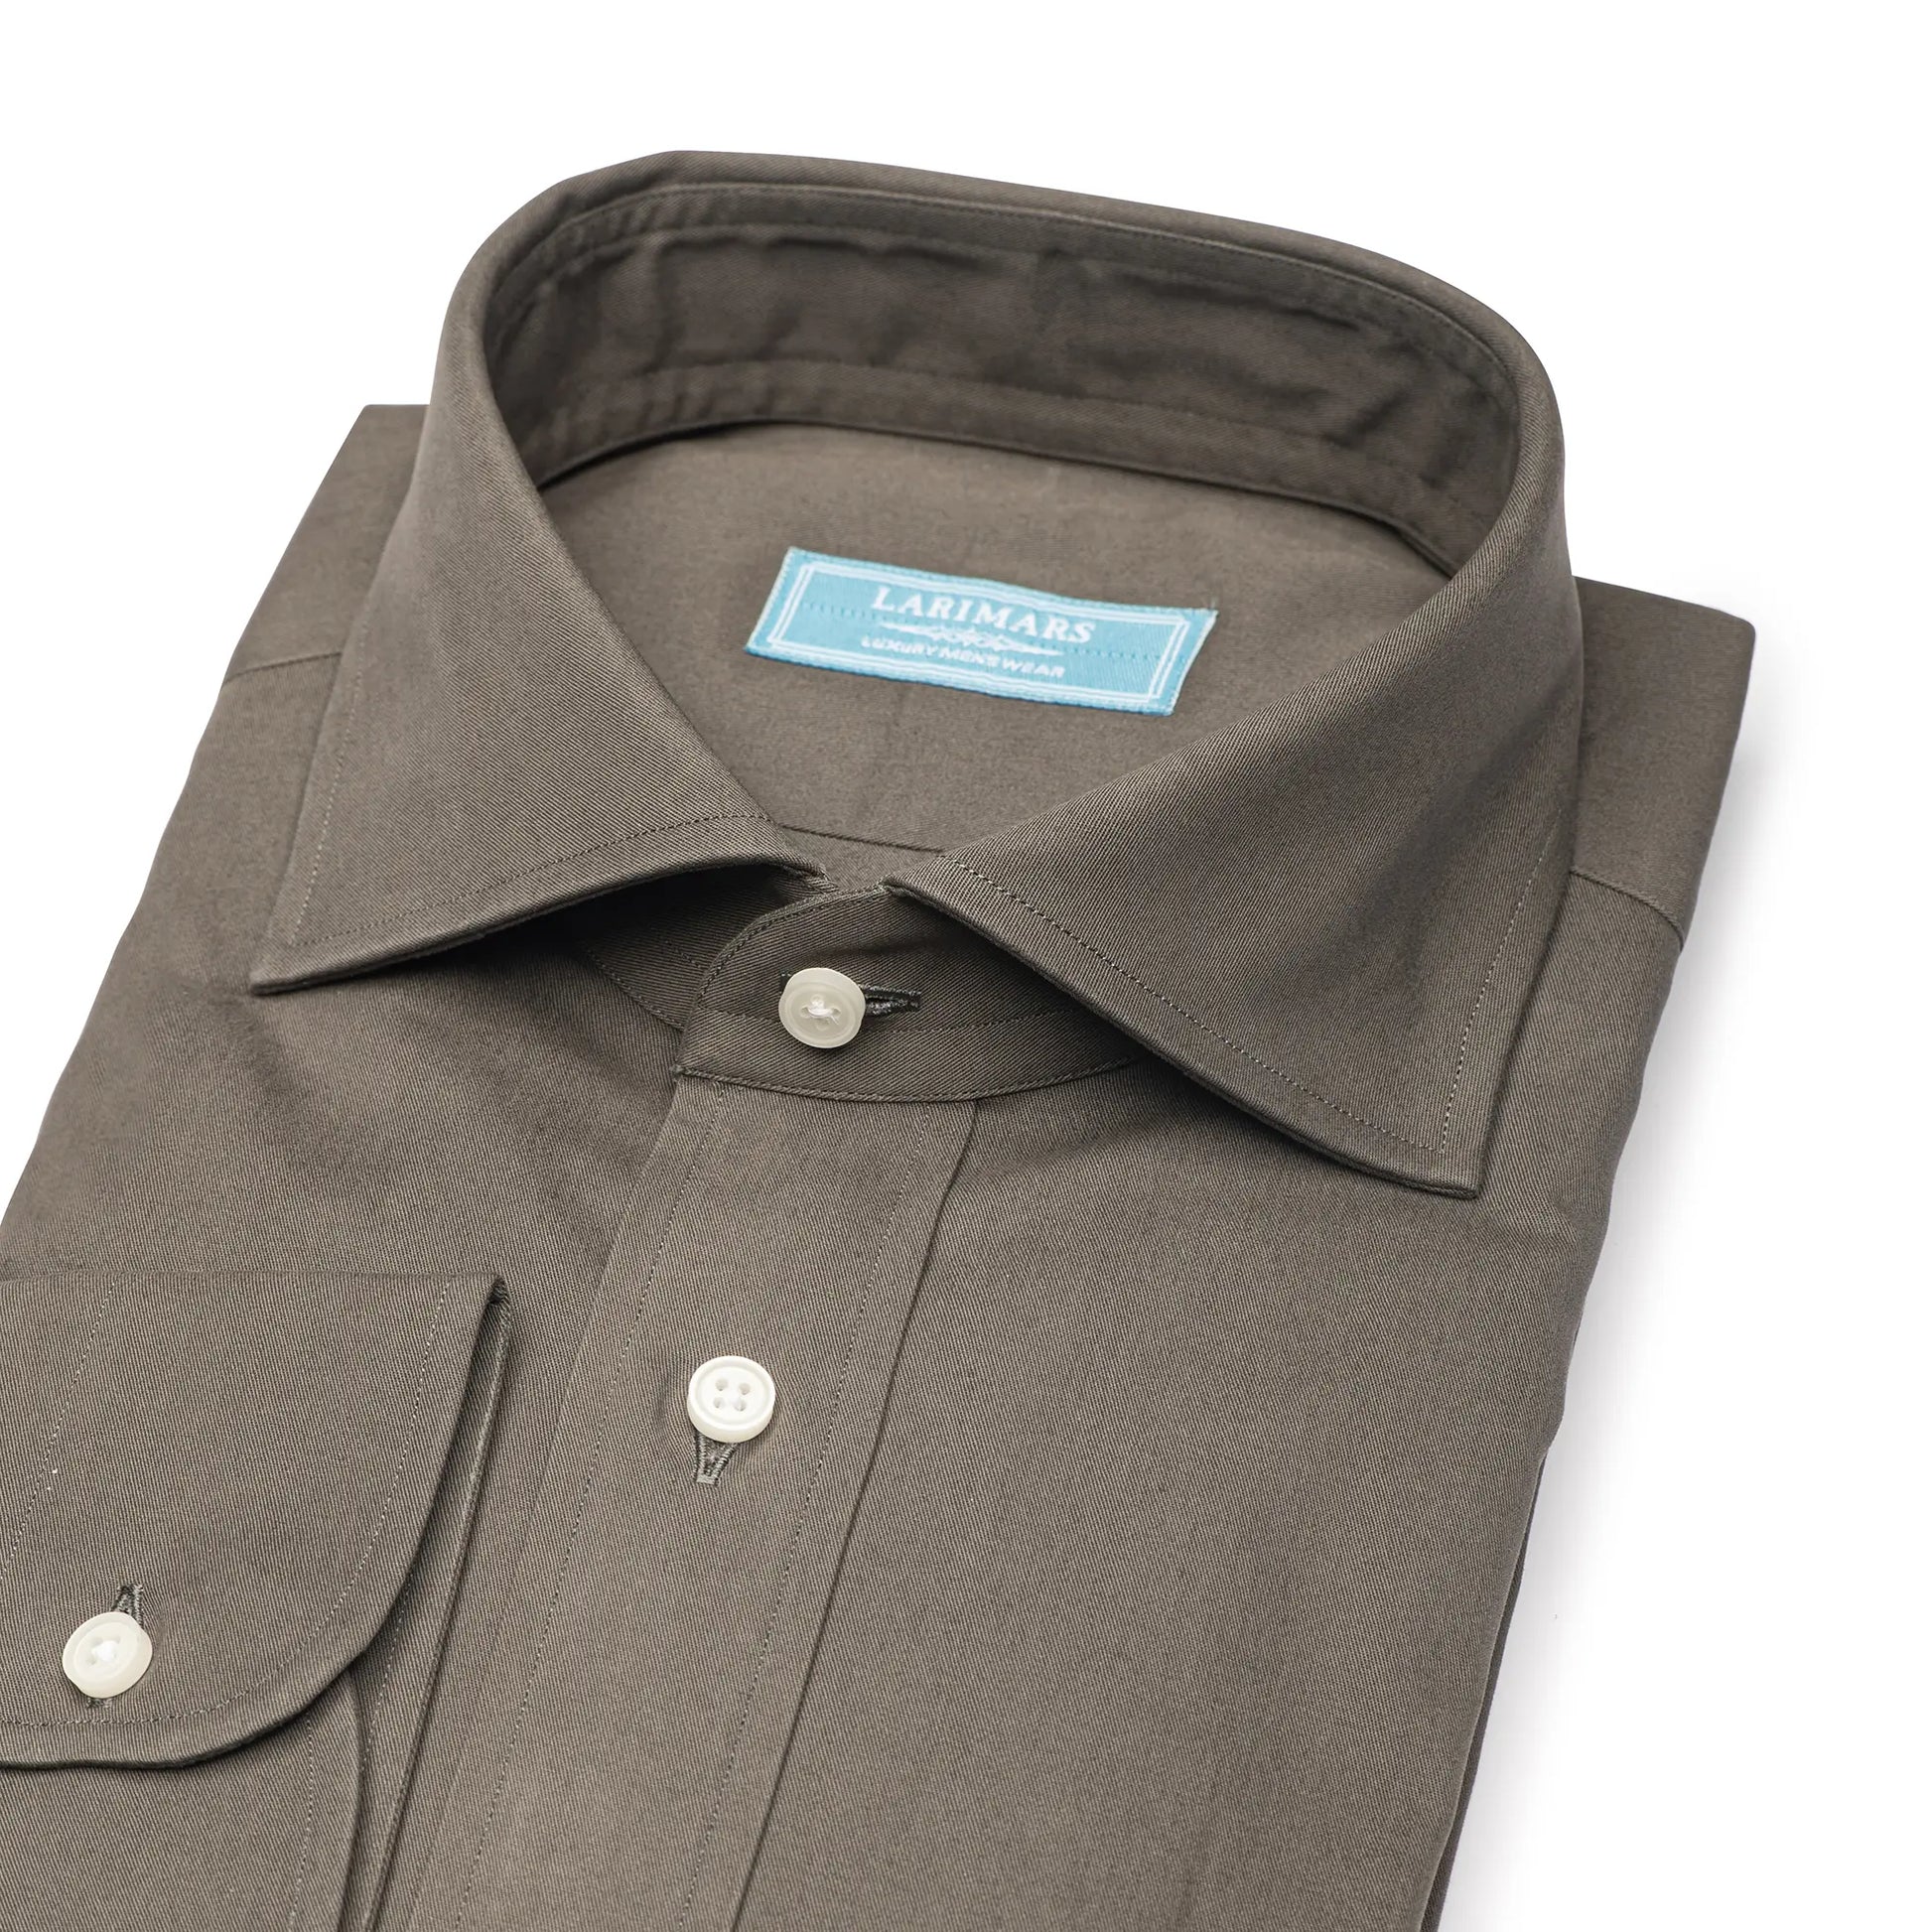 Olive Twill Shirt - Larimars Clothing Men's Formal and casual wear shirts